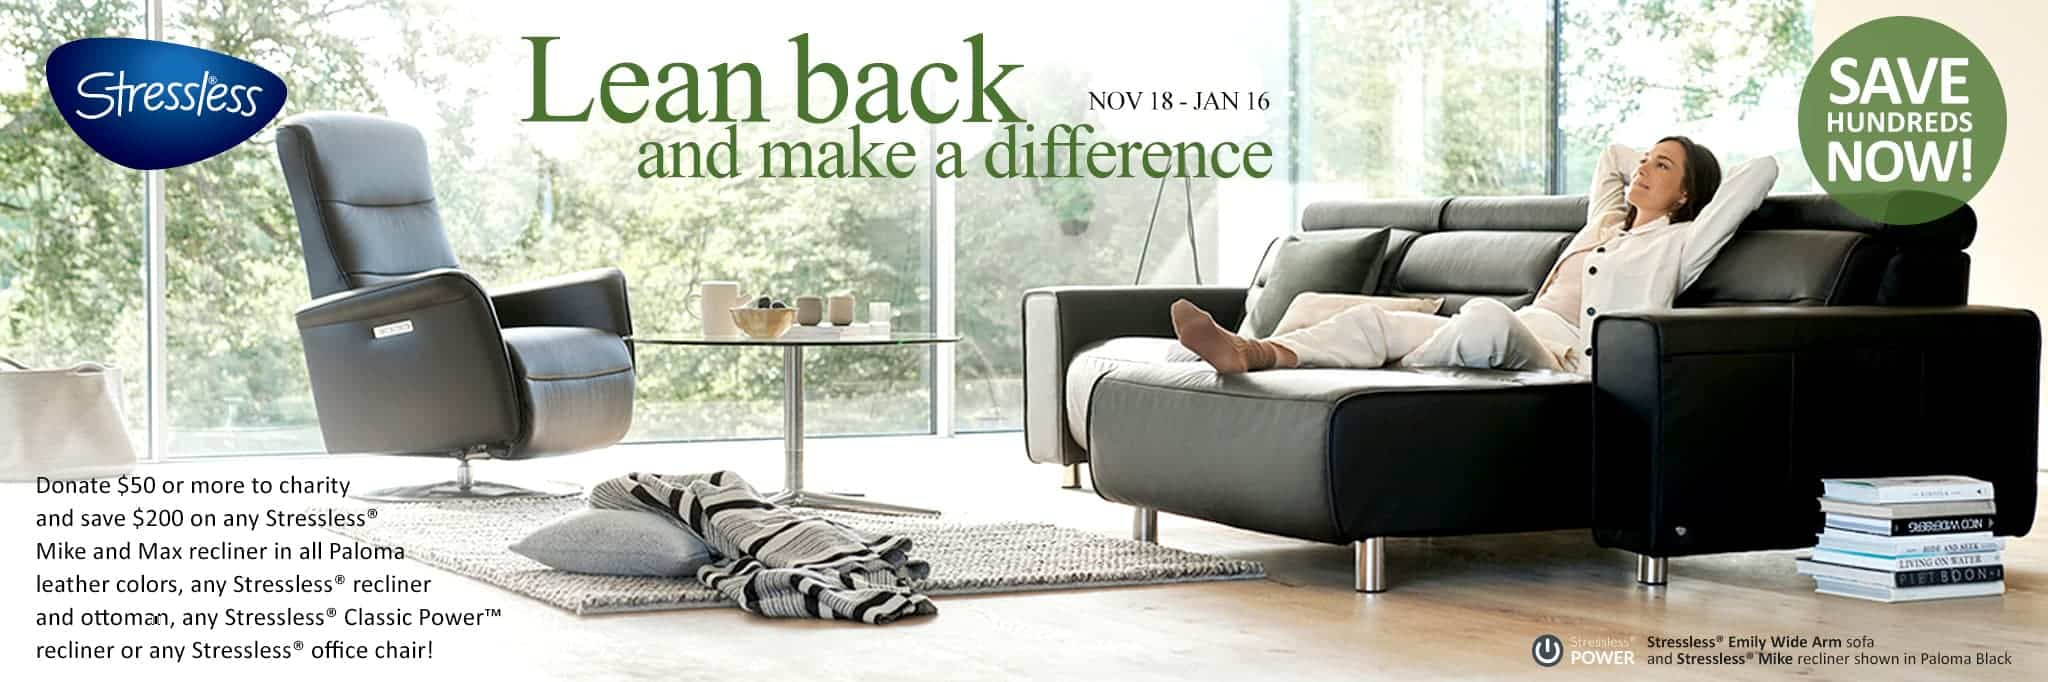 Stressless® Promo: Donate to charity and save hundreds off Stressless® furniture